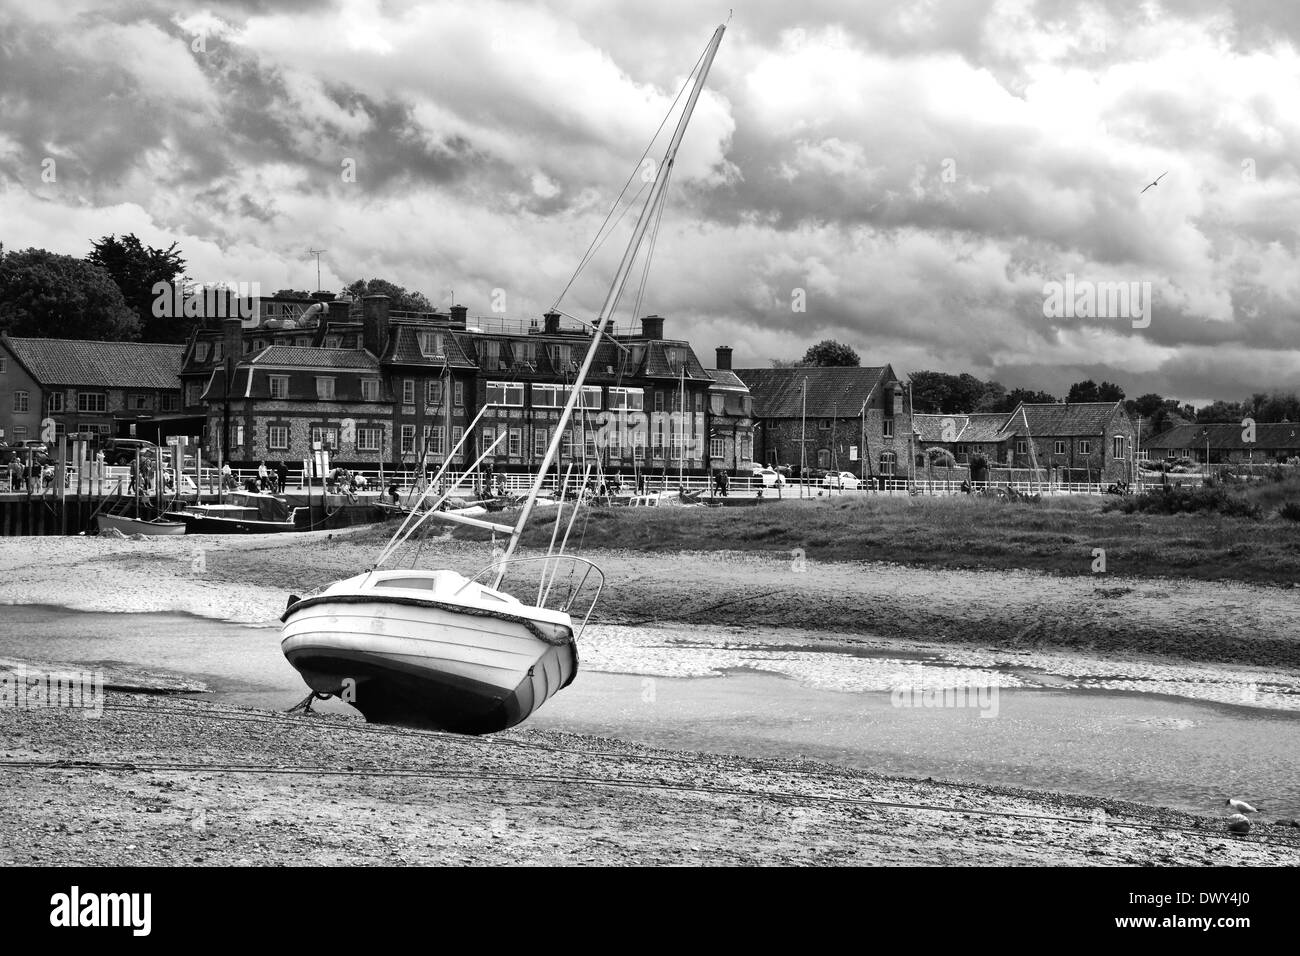 The Blakeney Hotel and harbour, North Norfolk. Stock Photo